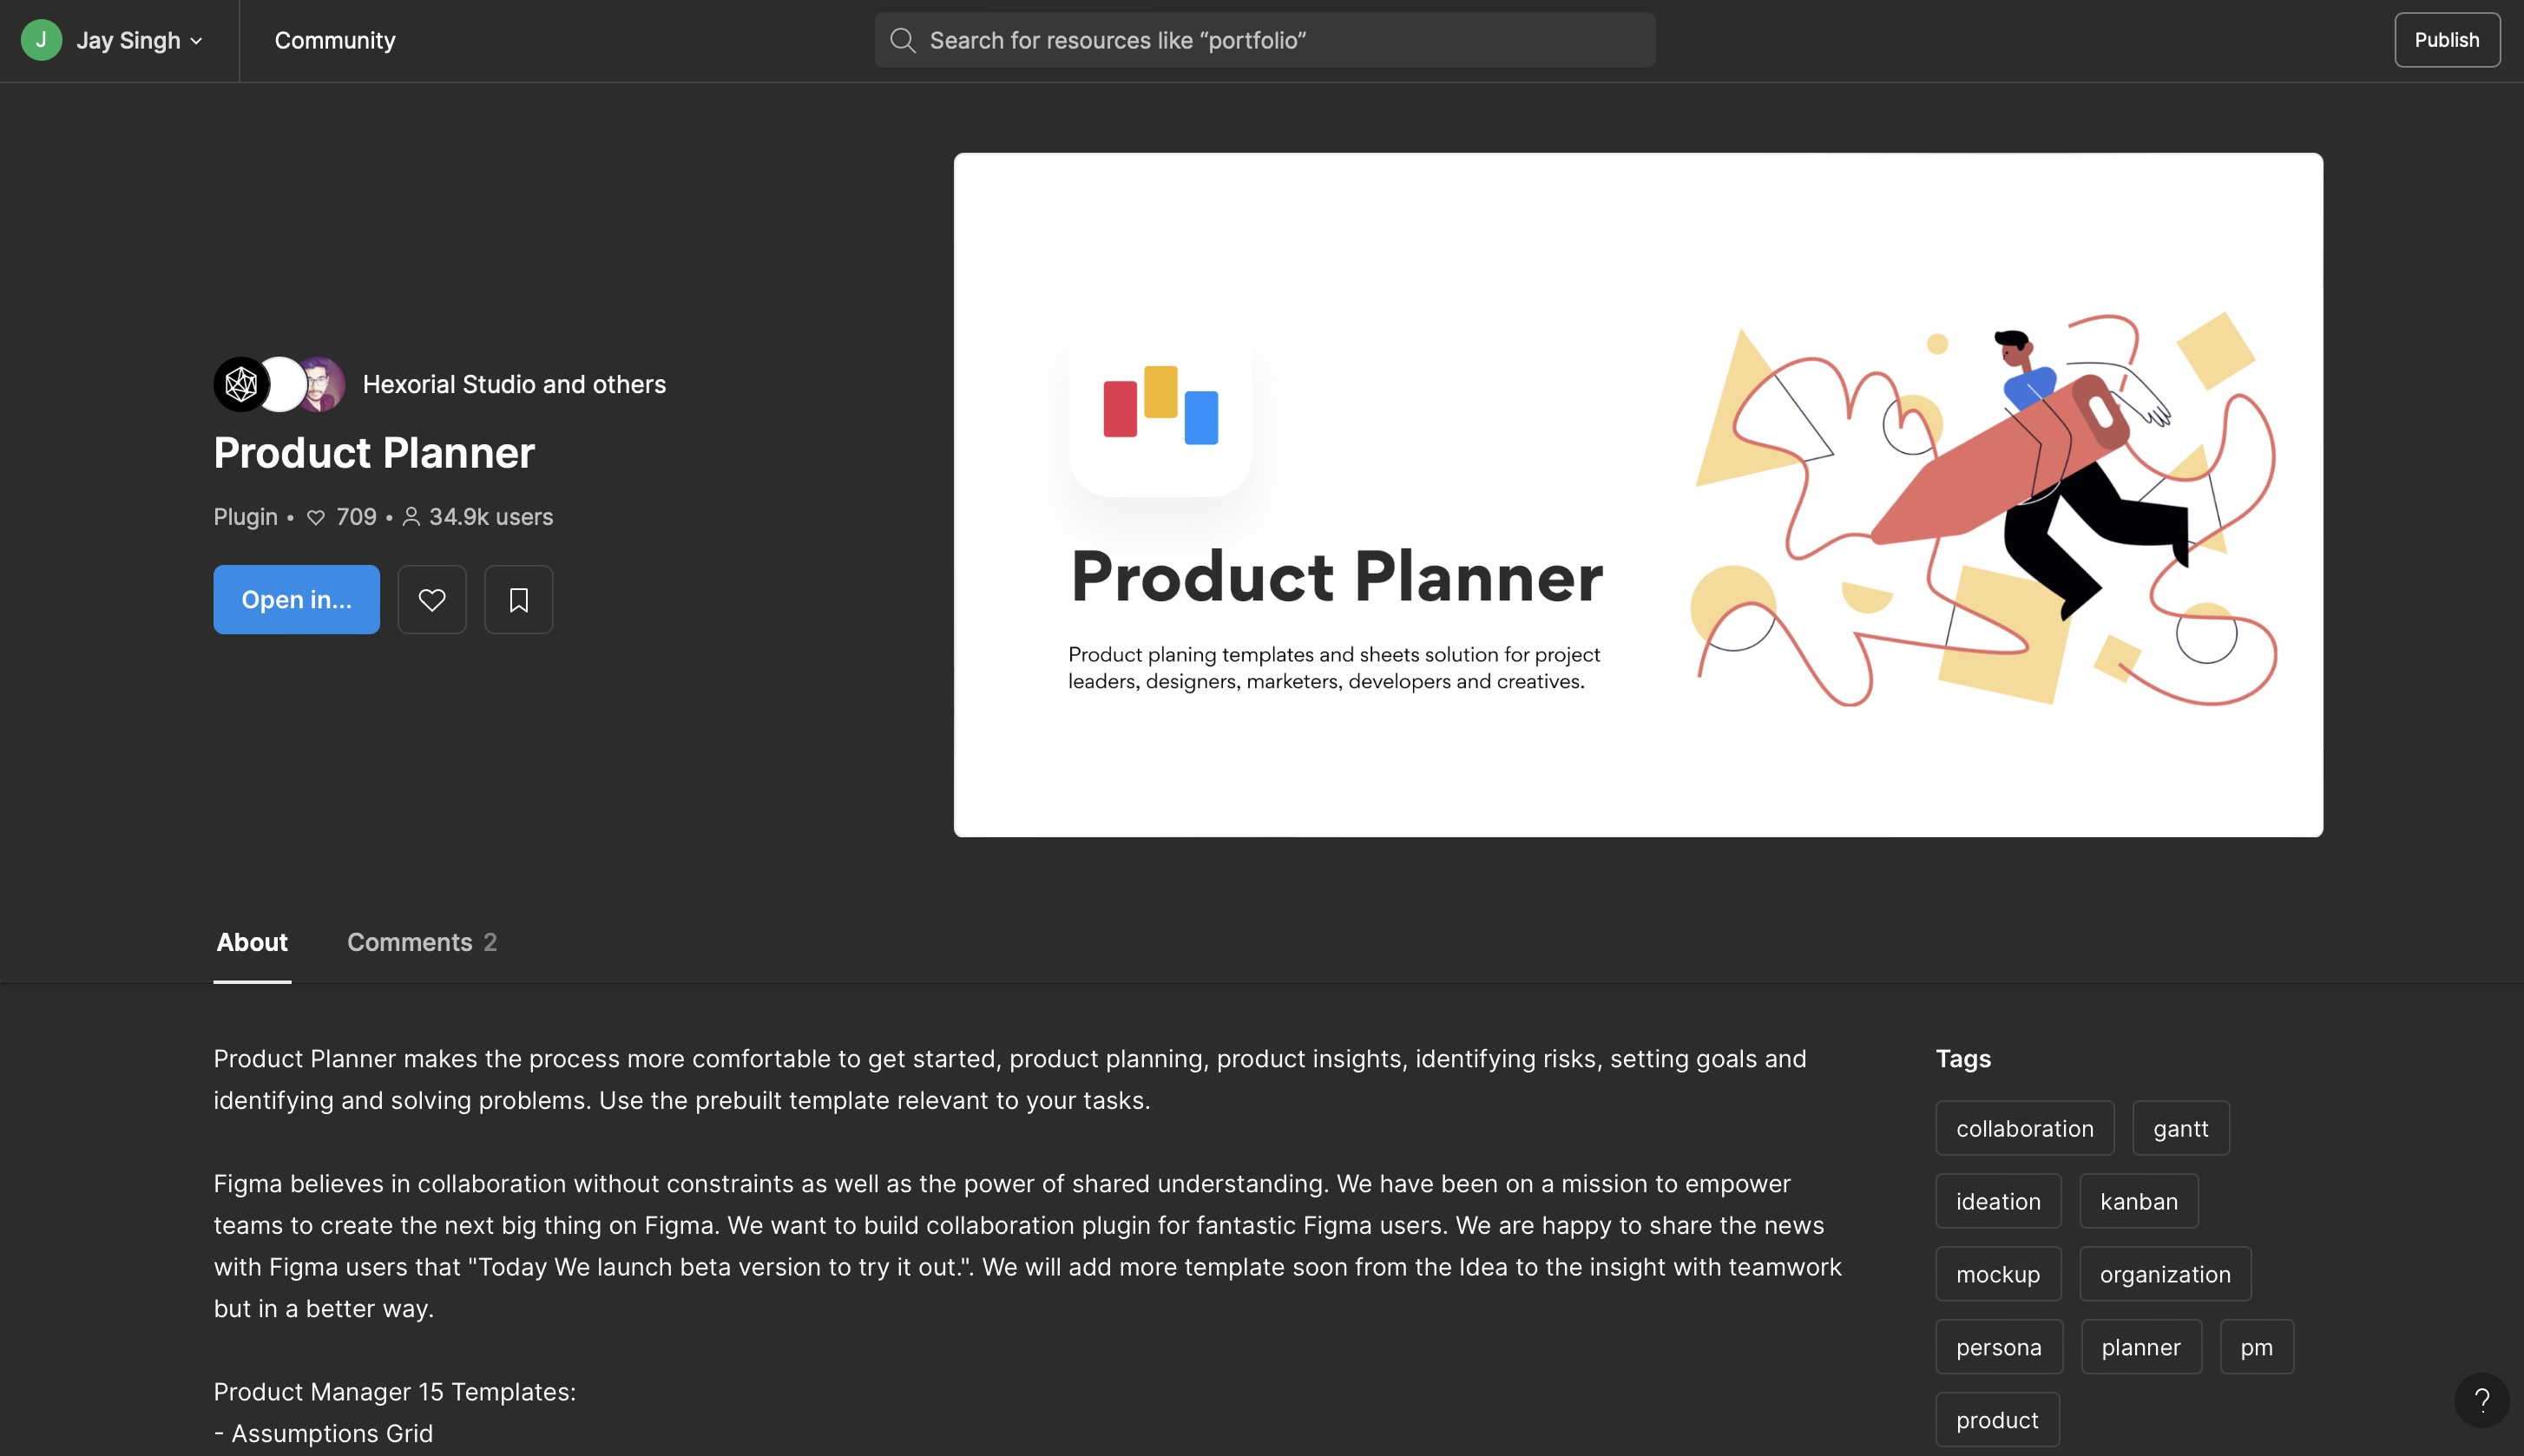 Product Planner